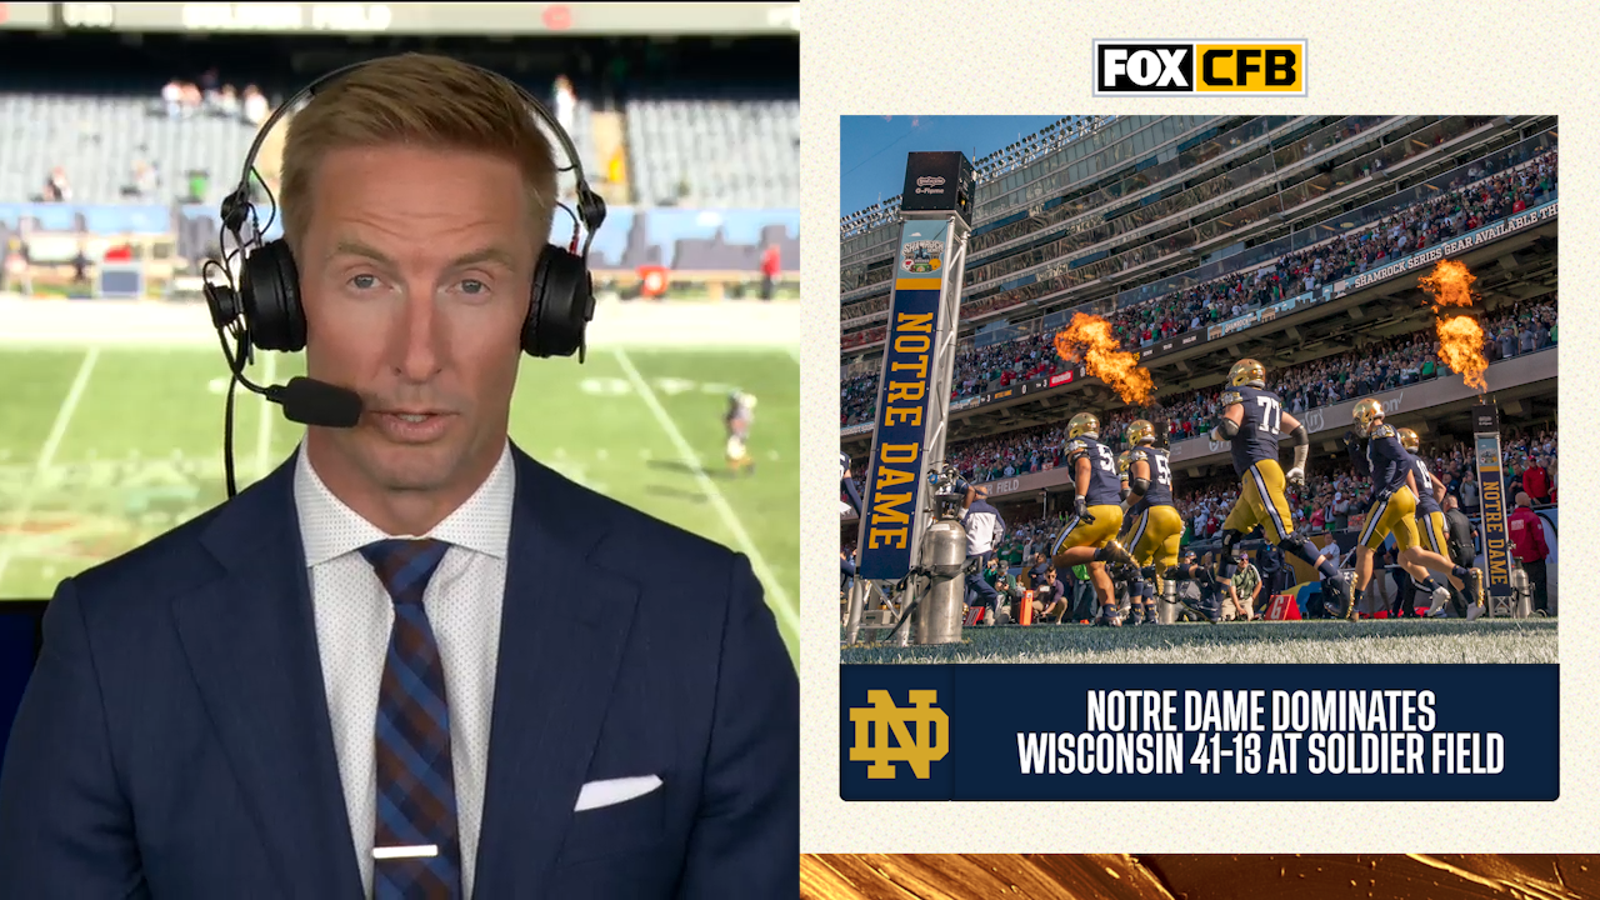 'Be excited about this team and its future' - Joel Klatt on Notre Dame's win over Wisconsin